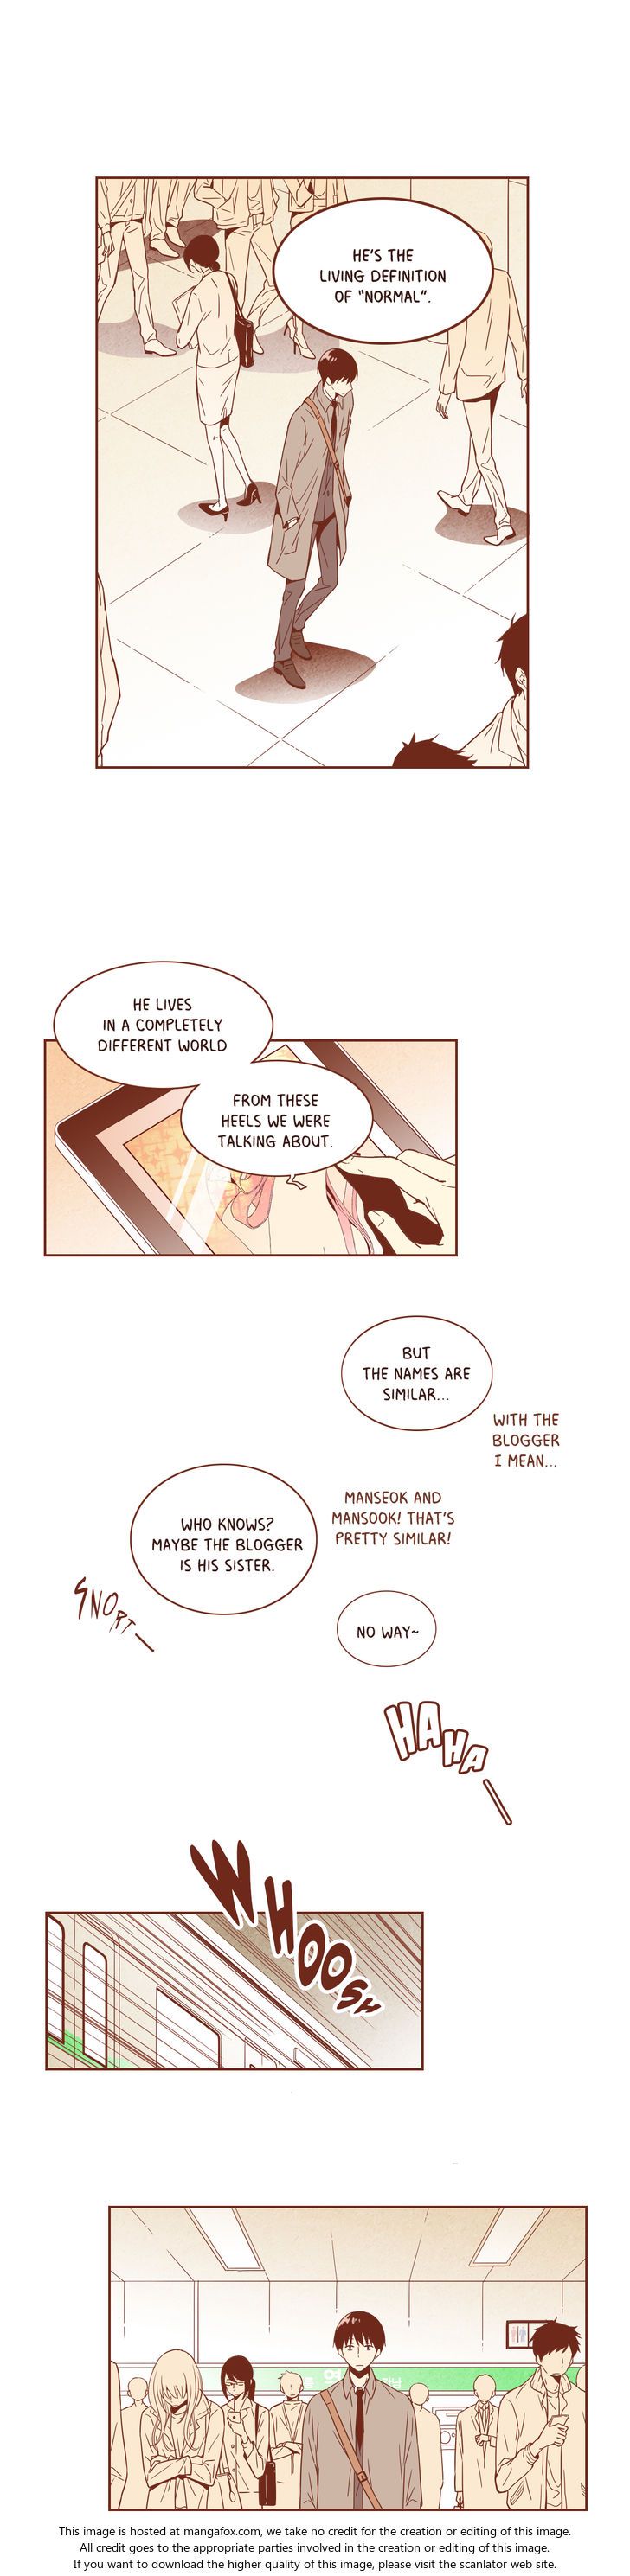 Why Did Men Stop Wearing High Heels? Chapter 002 page 6